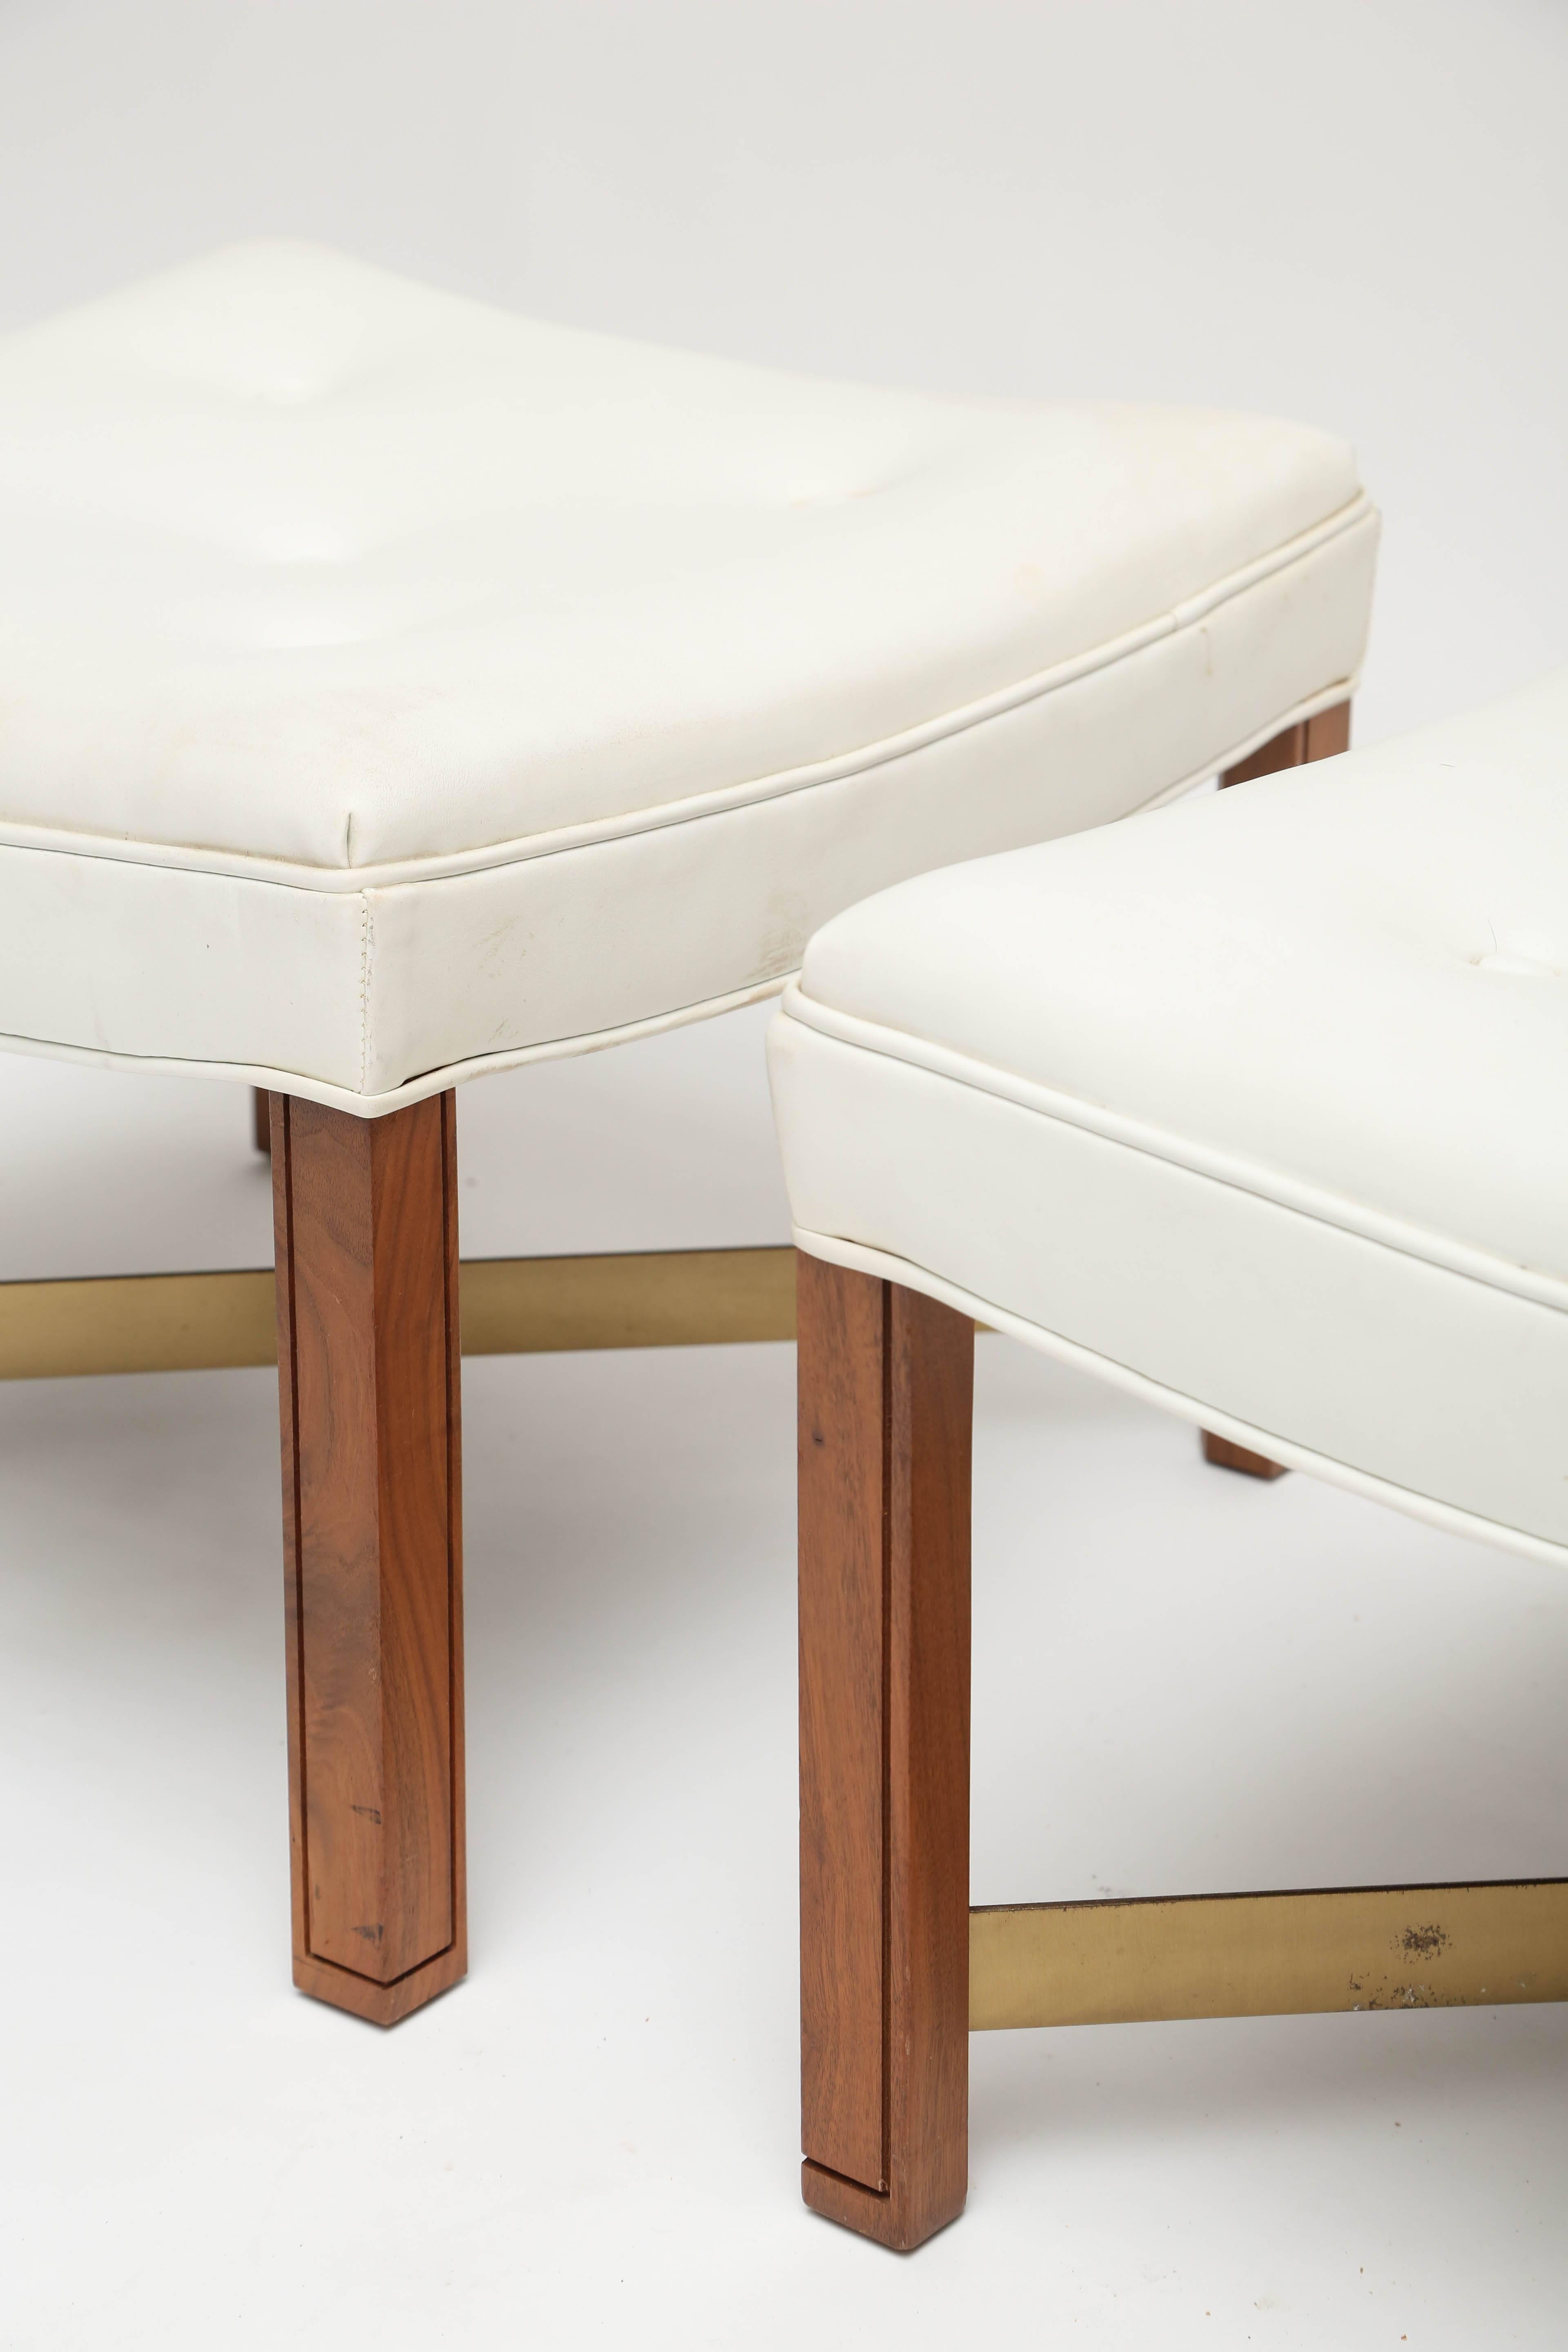 Paul Laszlo Cross-Stretcher Stools In Excellent Condition For Sale In West Palm Beach, FL